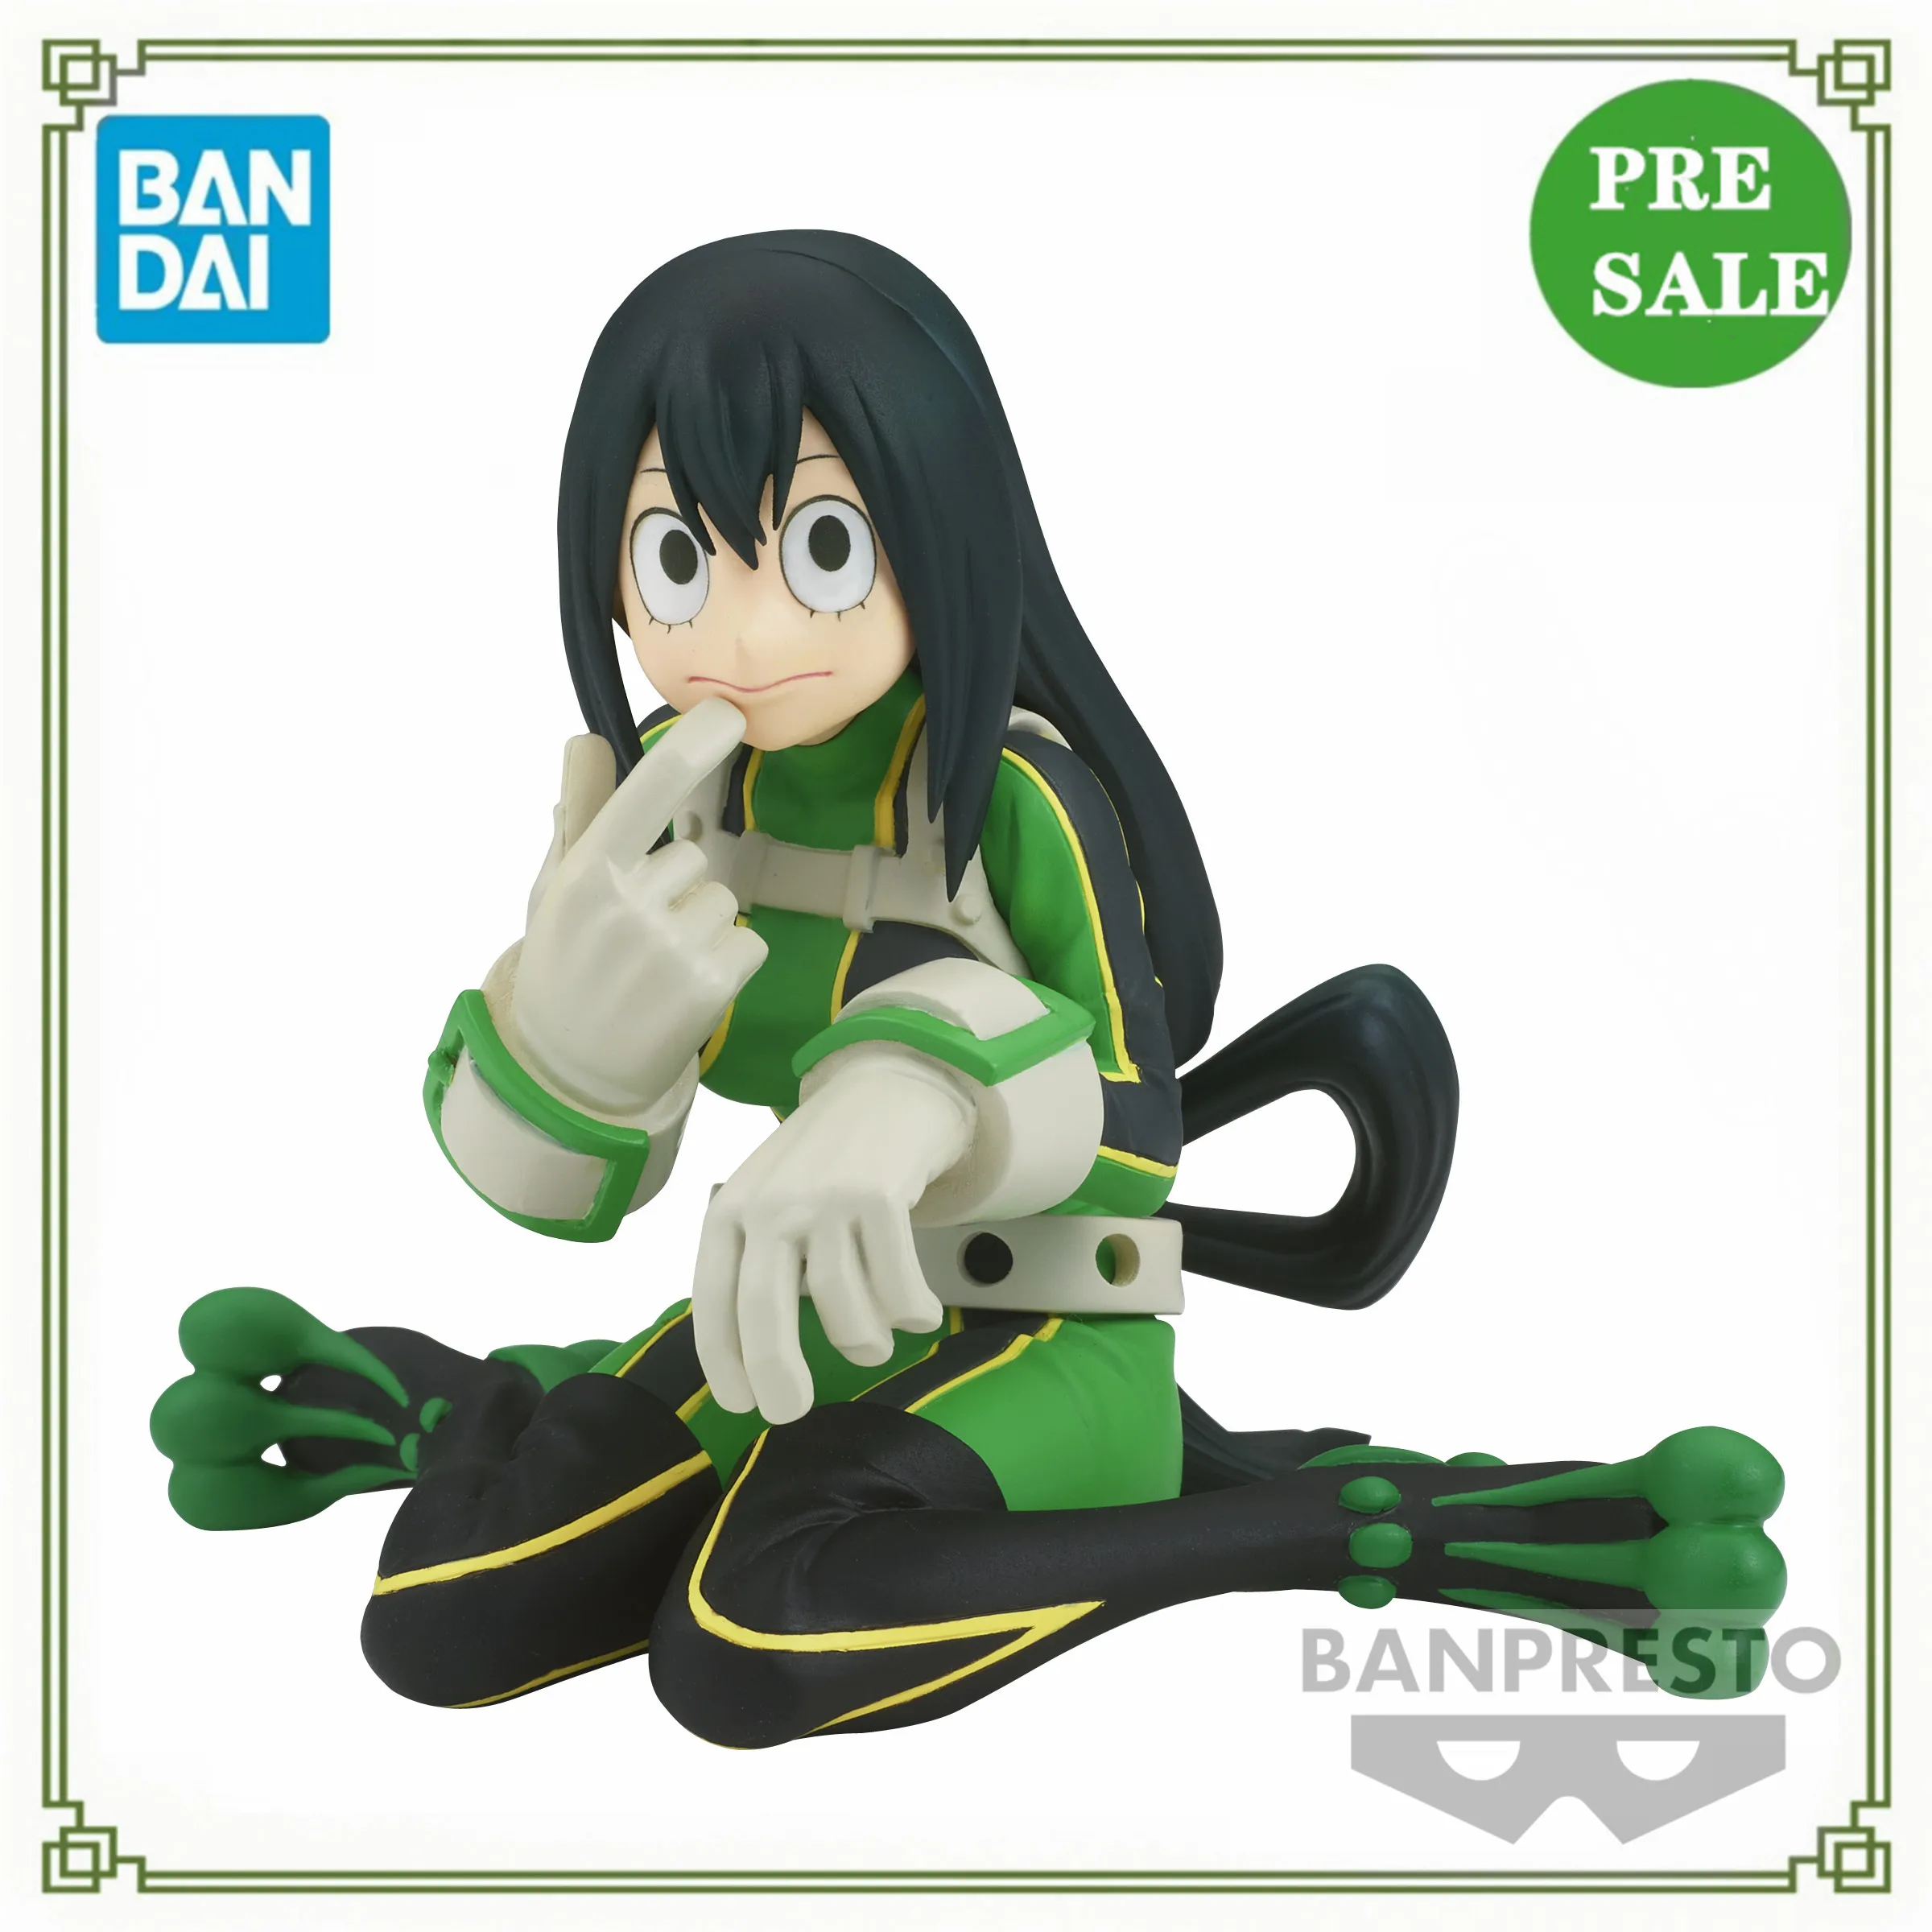 

My Hero Academia Asui Tsuyu FROPPY Anime Figure Original Breaking Time Vol.6 PVC Action Figure Bandai Collector Toy for Children